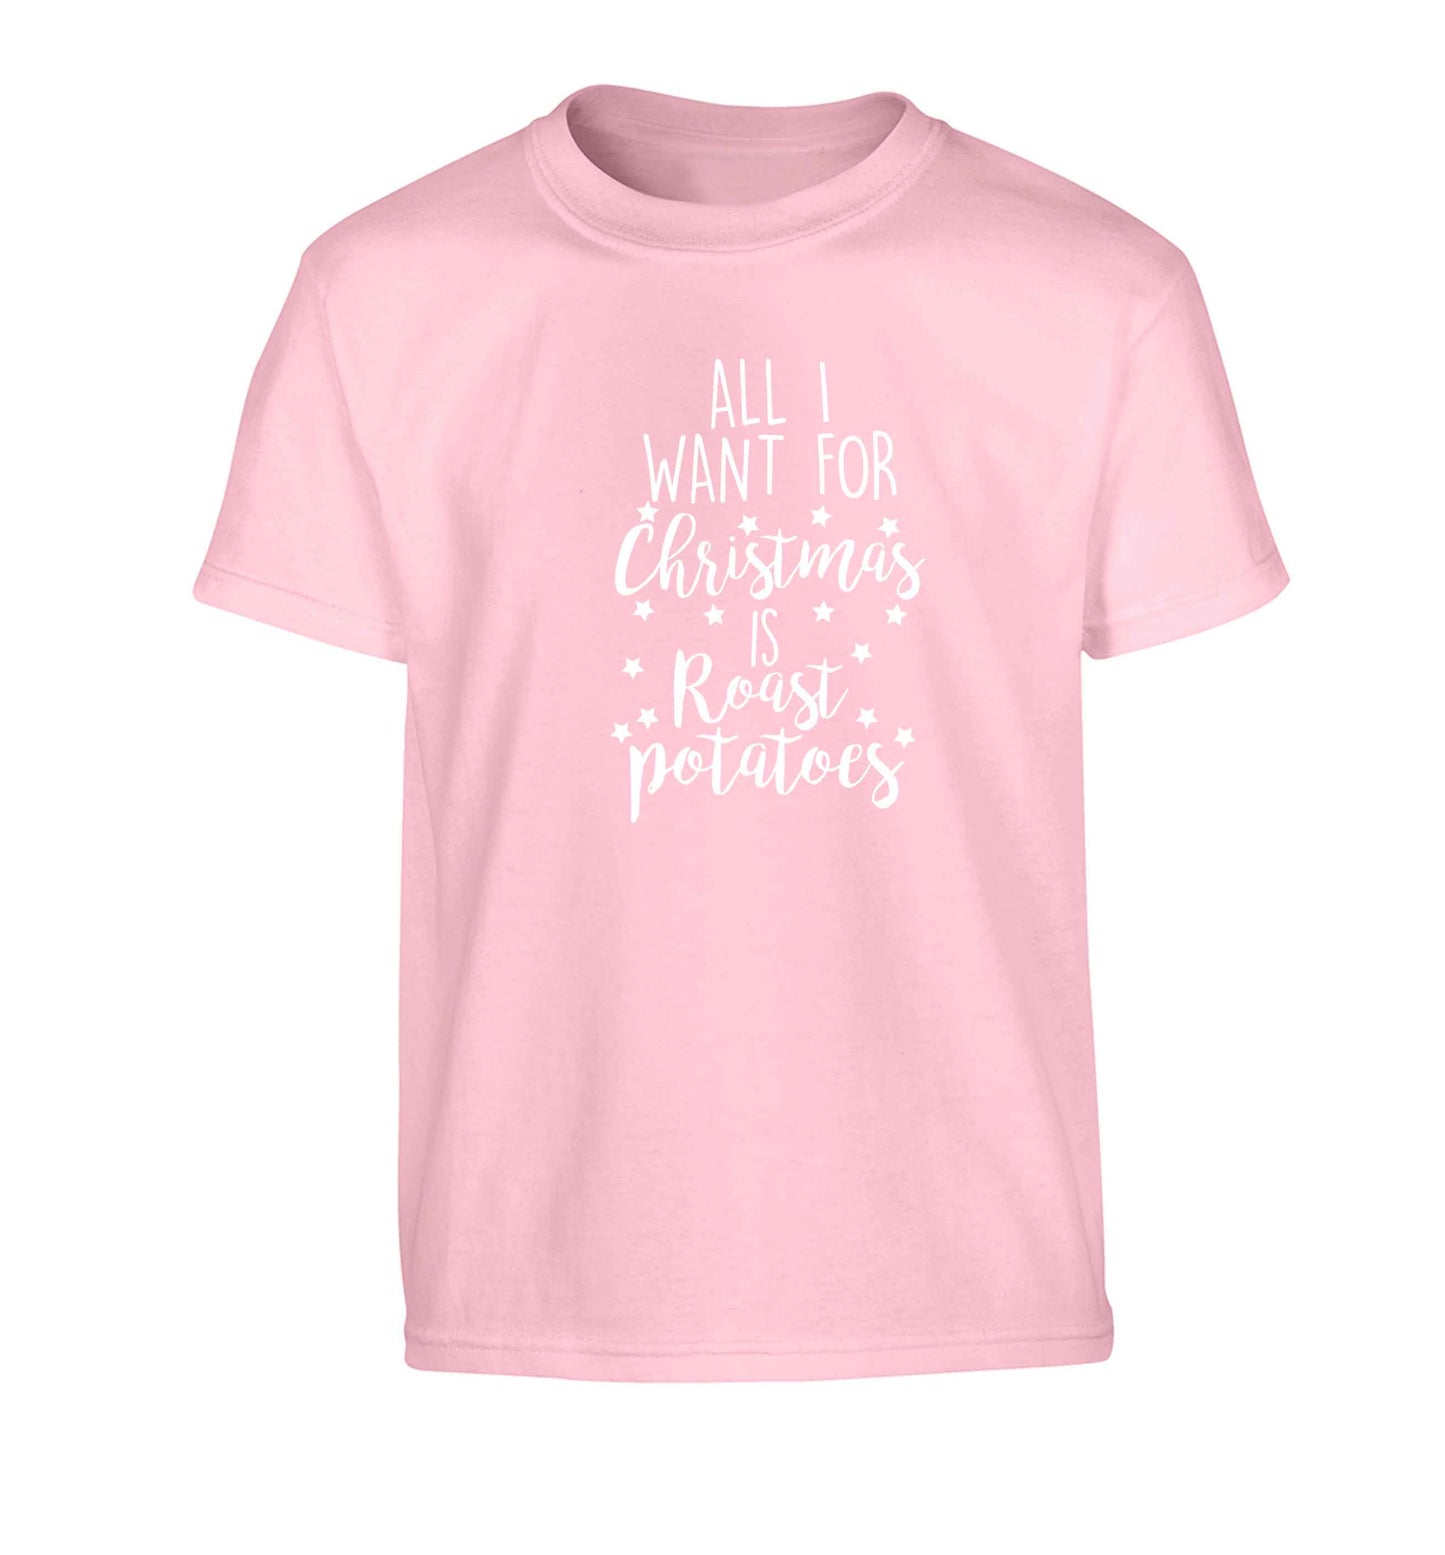 All I want for Christmas is roast potatoes Children's light pink Tshirt 12-13 Years